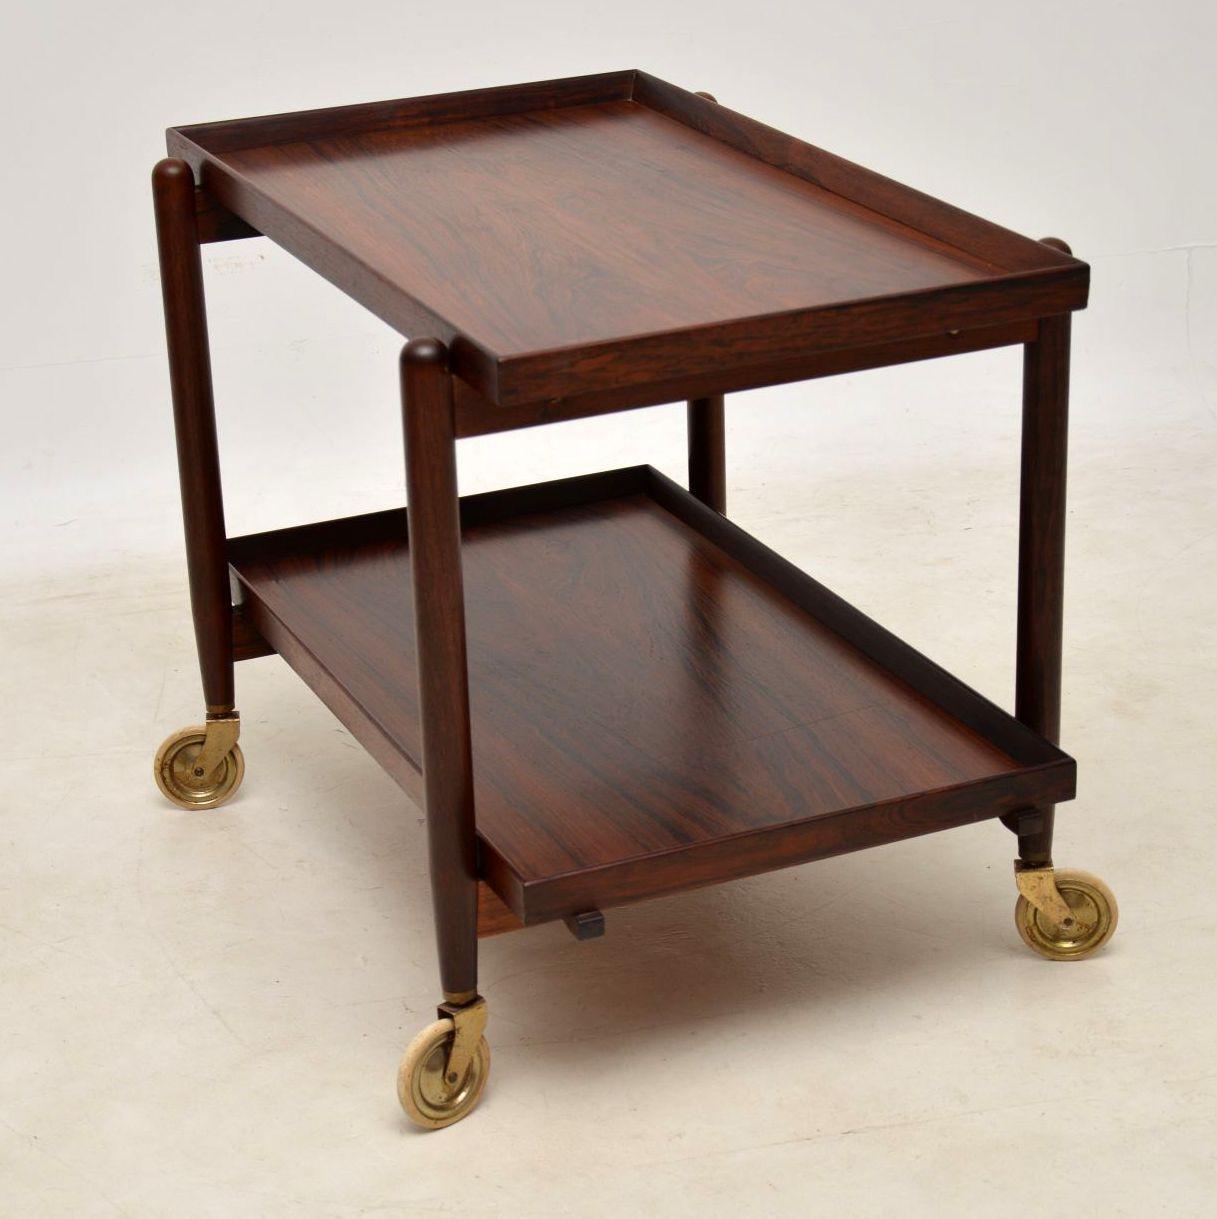 A stunning and extremely well made vintage Danish drinks trolley in rosewood, this was designed by Poul Hundevad, it dates from the 1960s. The top tray slides across, and the bottom tray can then be lifted on to the top surface to effectively double